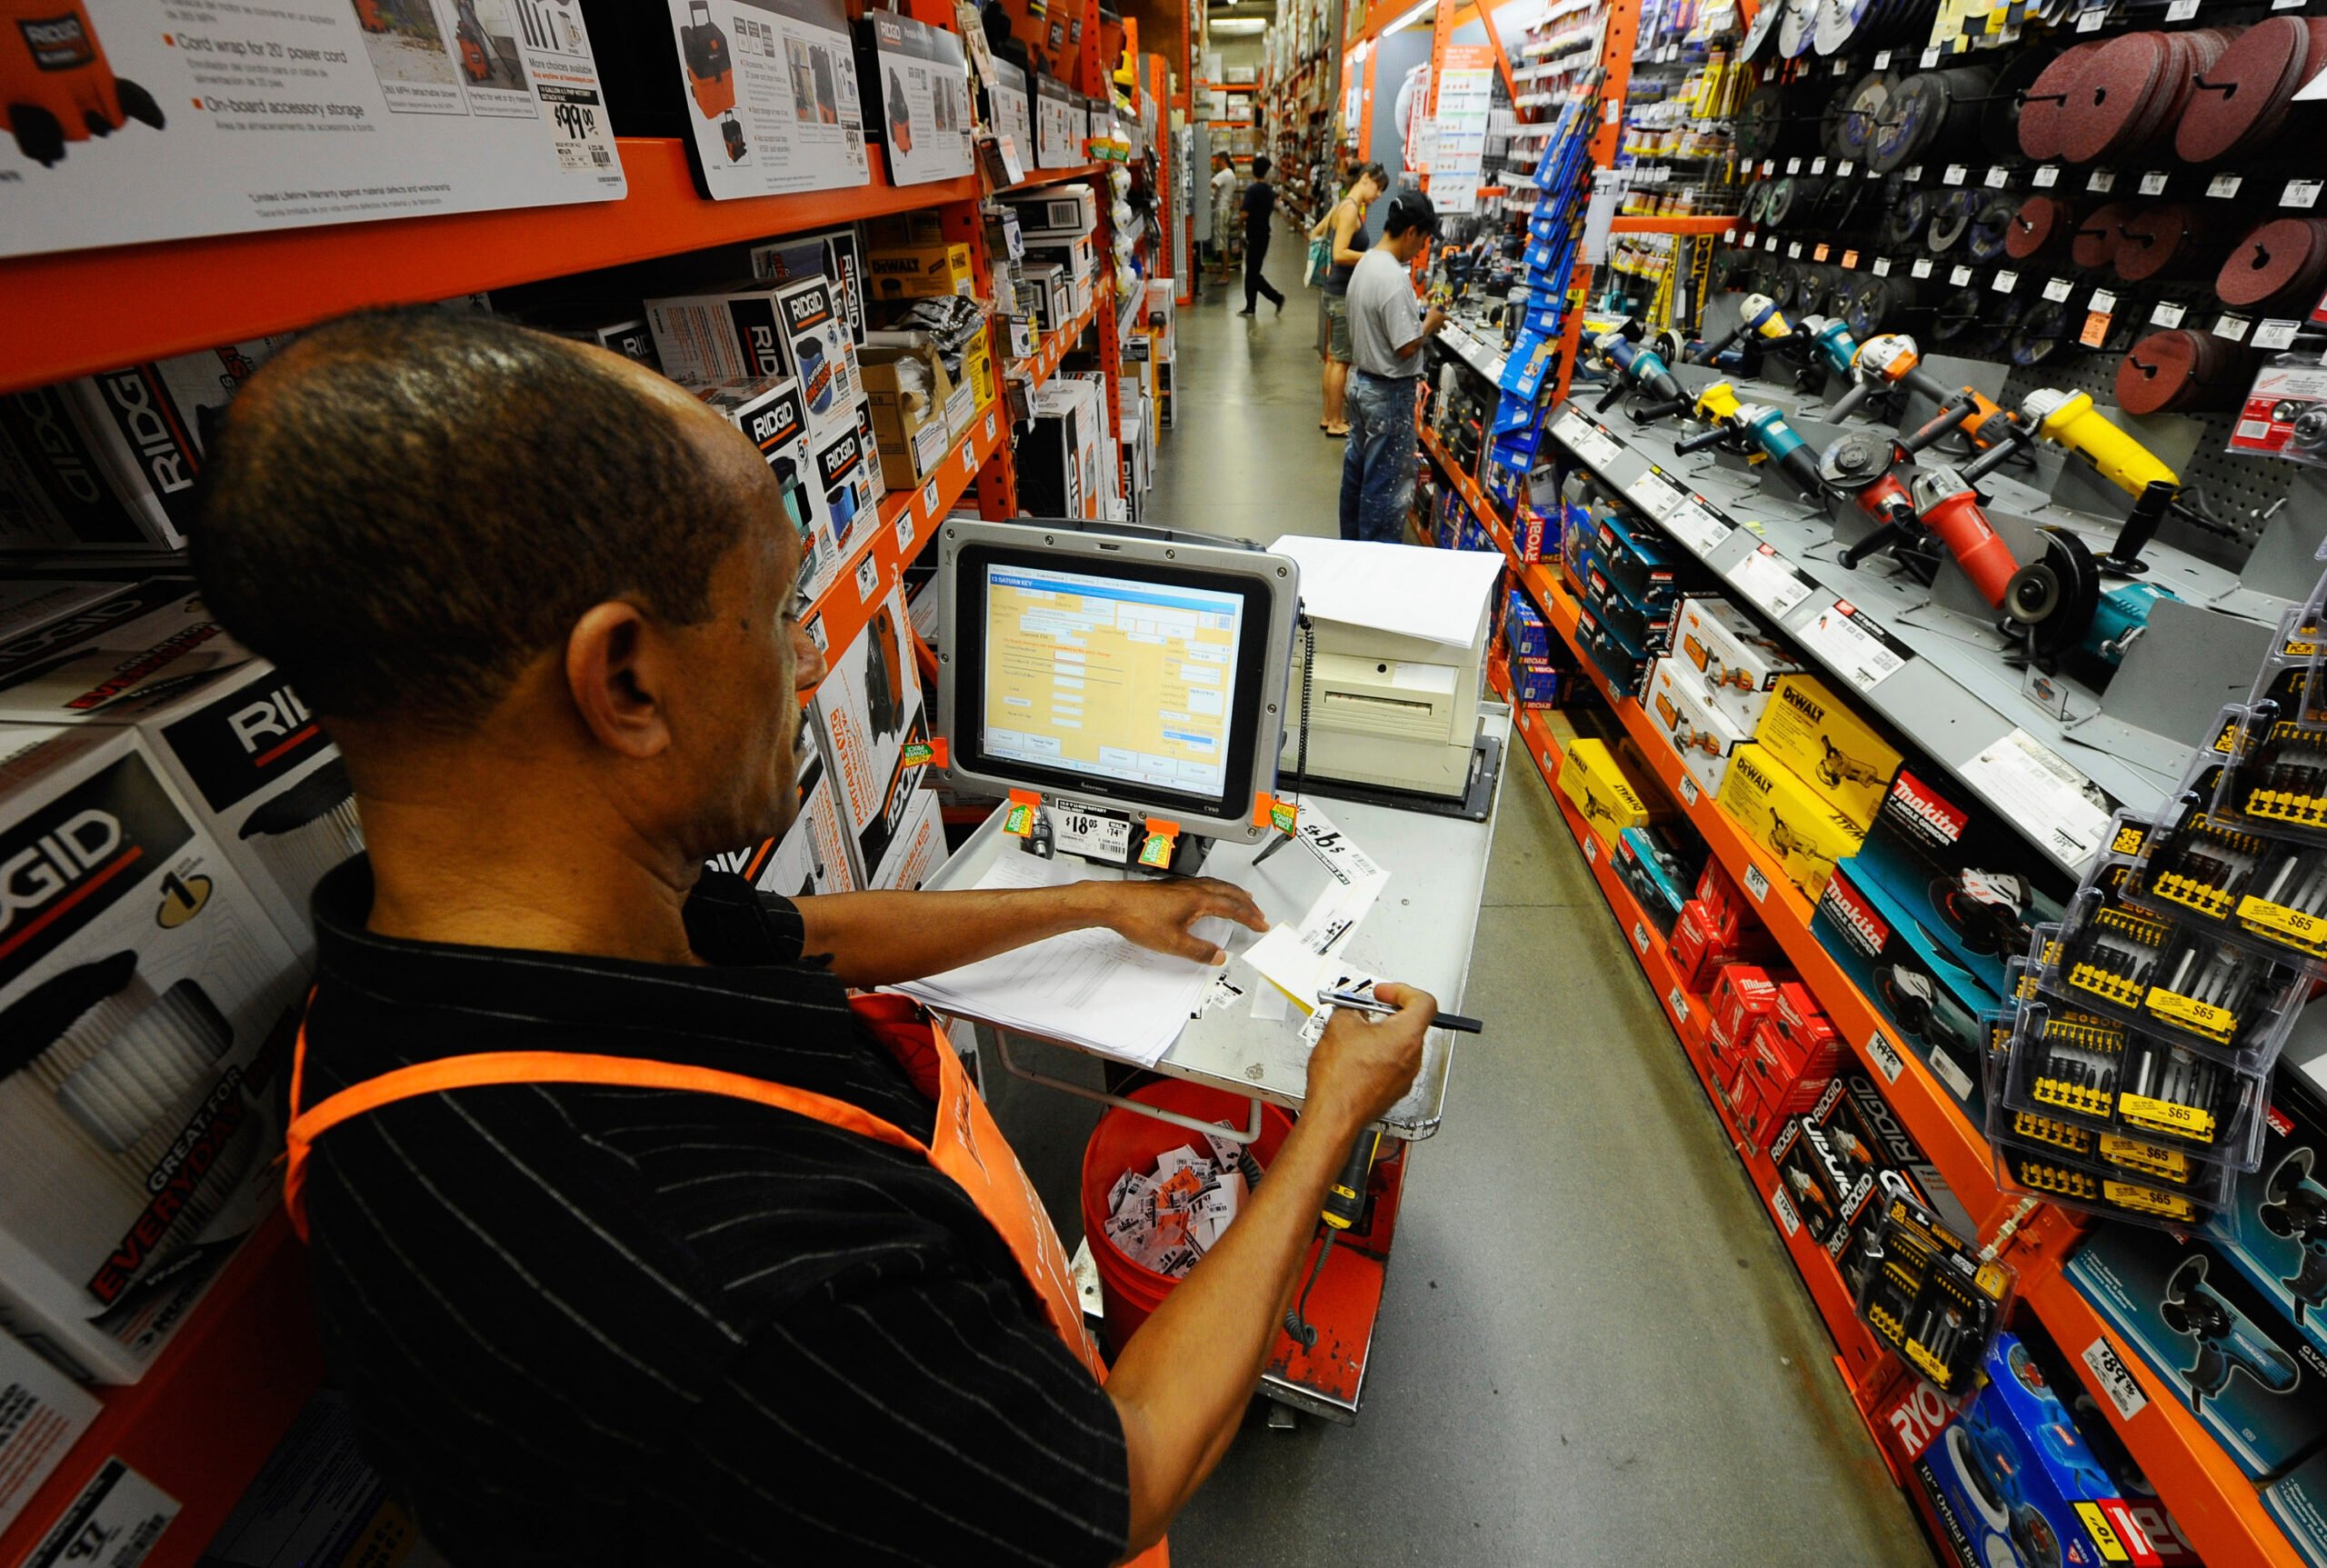 LOS ANGELES - AUGUST 17: Eshetu Tsegahun takes inventory in the hardware tools section of a Home Depot store on August 17, 2010 in Los Angeles, California. Atlanta-based Home Depot Inc.'s fiscal second-quarter profit rose 6.8 percent as they've seen a 1.8 percent increase in sales.  (Photo by Kevork Djansezian/Getty Images)